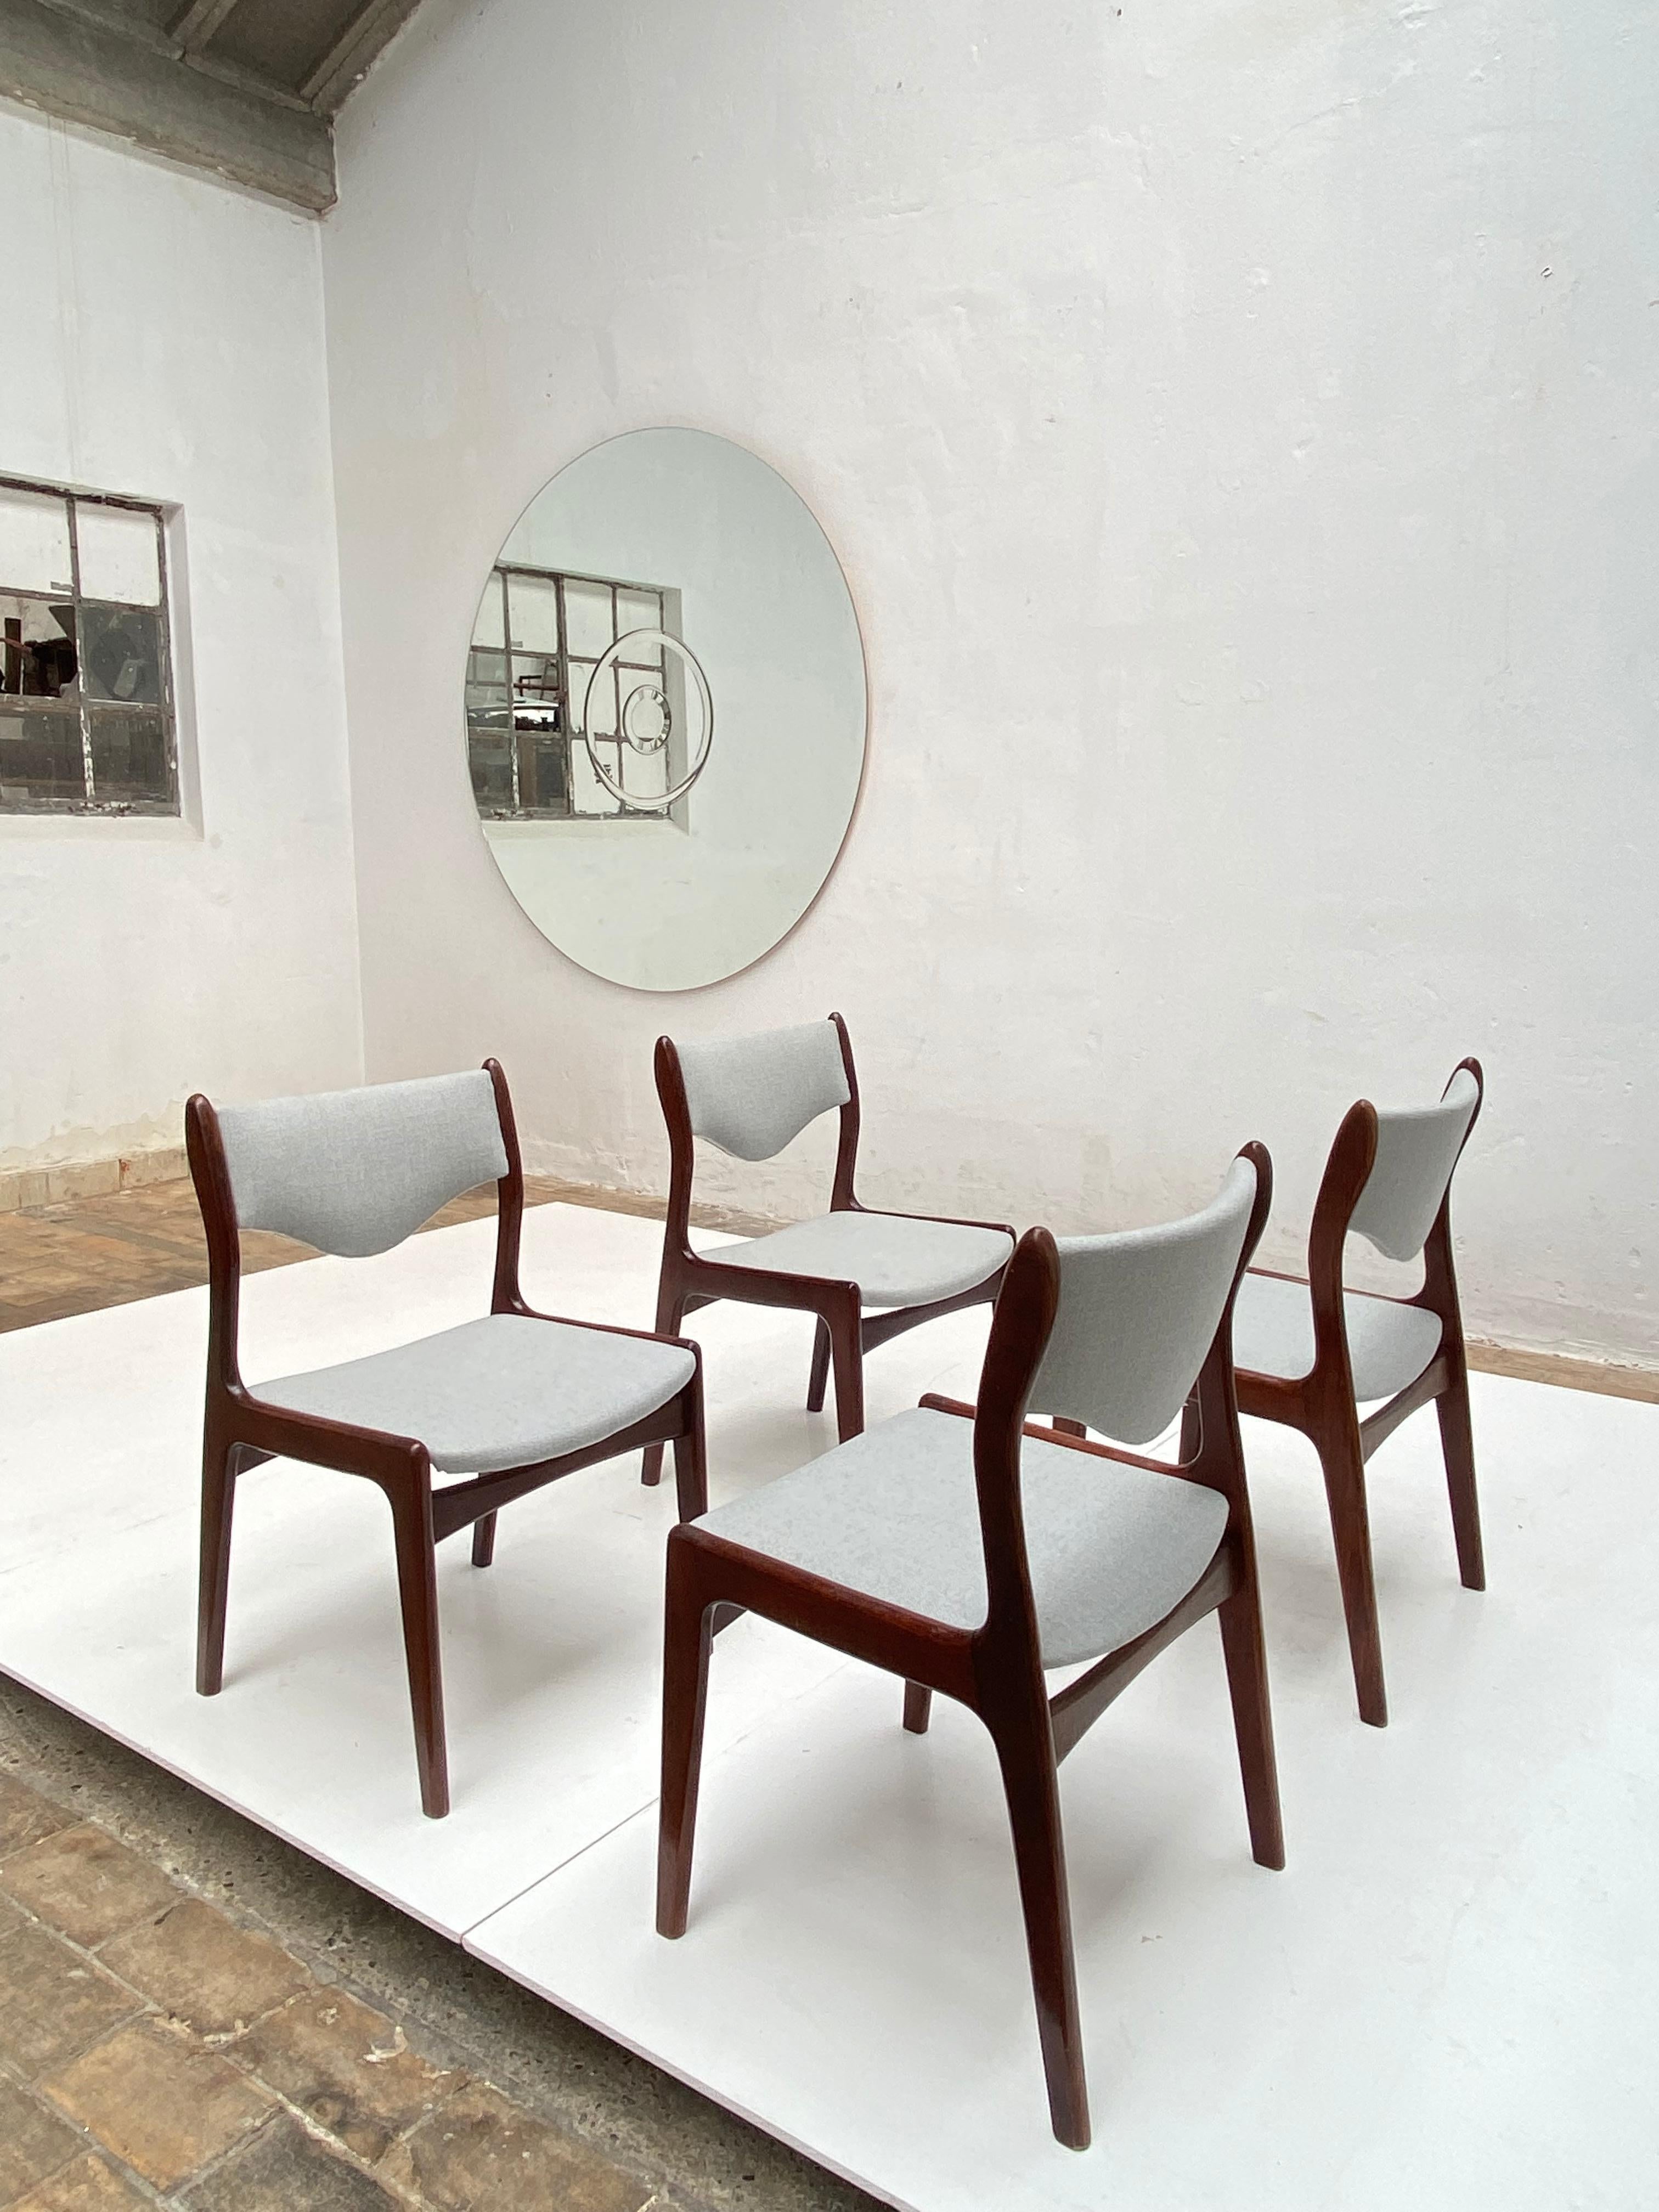 Wool Johannes Andersen Set of 4 Solid Teak Dining Chairs produced by Mahjongg, 1960's For Sale